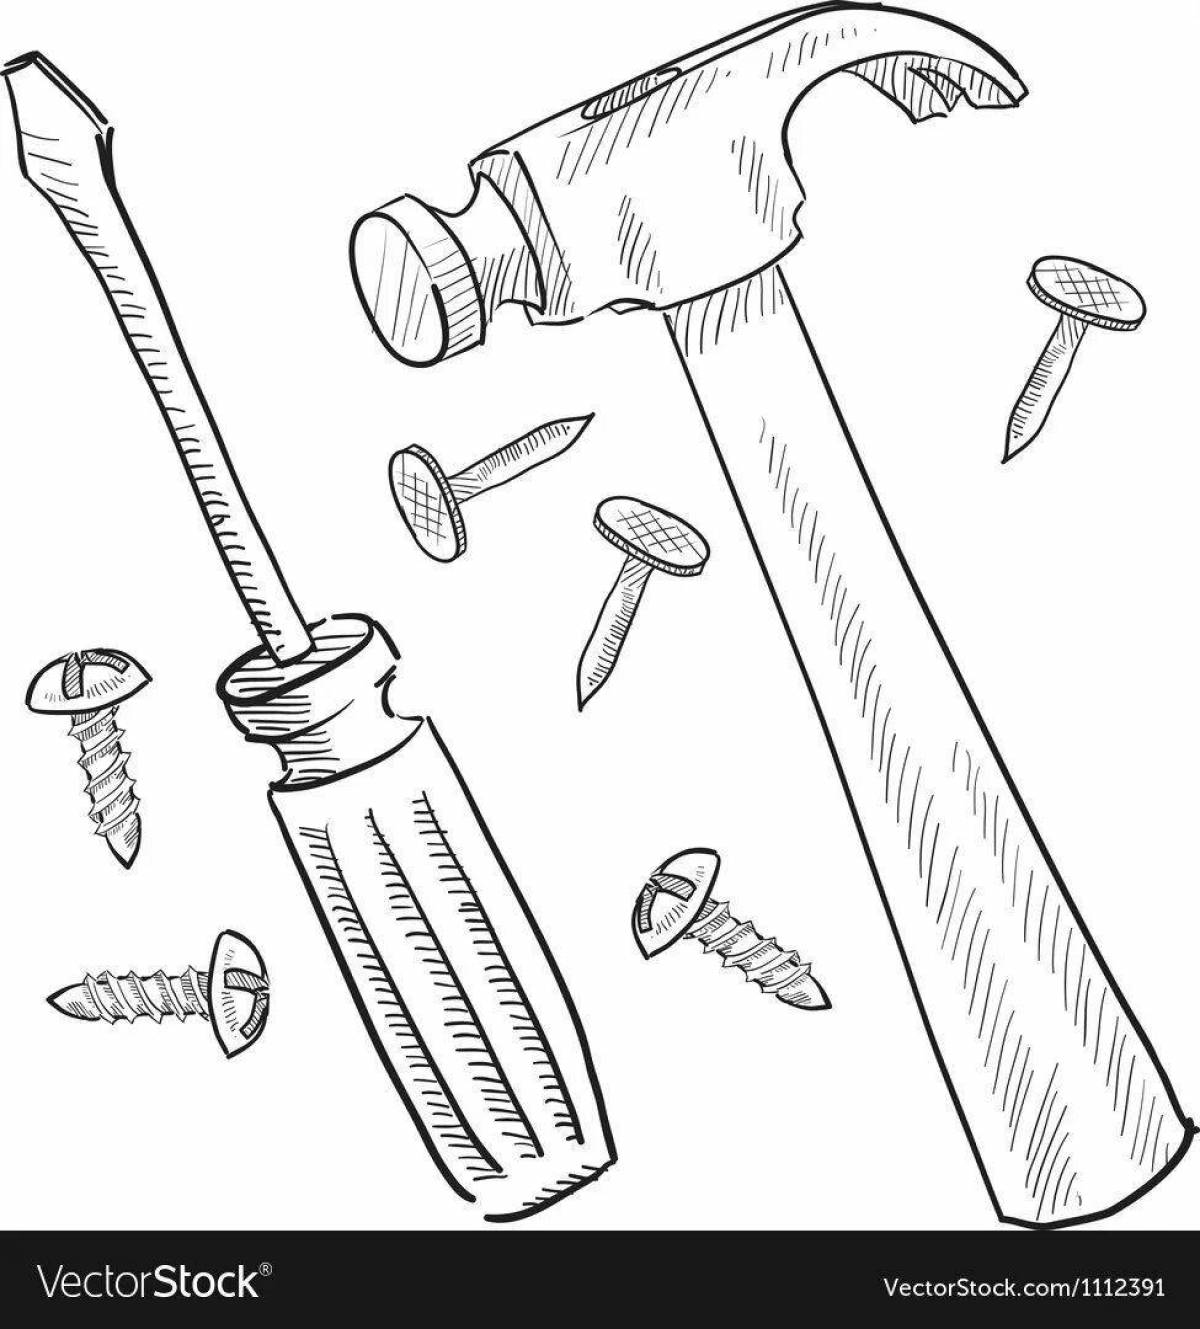 Coloring page of twinkling instrument colors